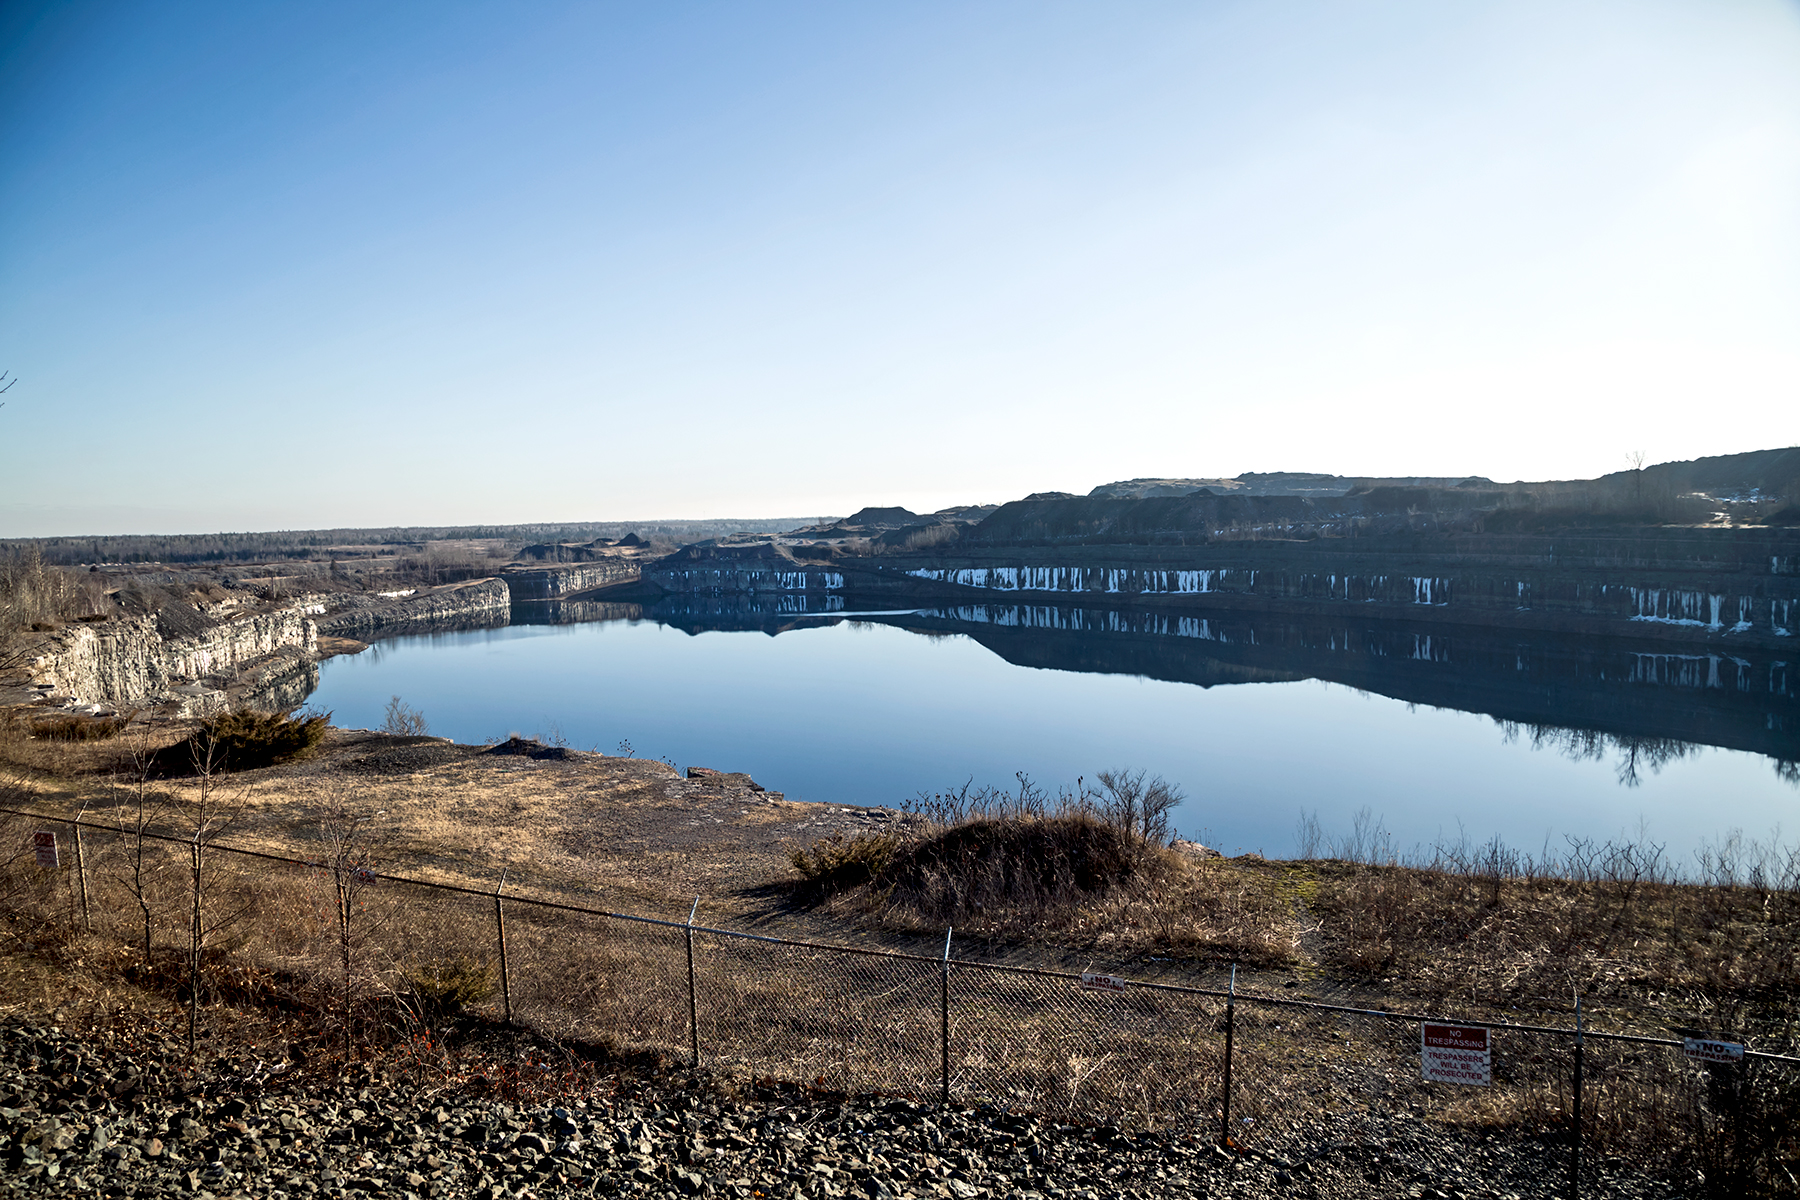 20140118. The abandoned open pit mine in Marmora is so vast and